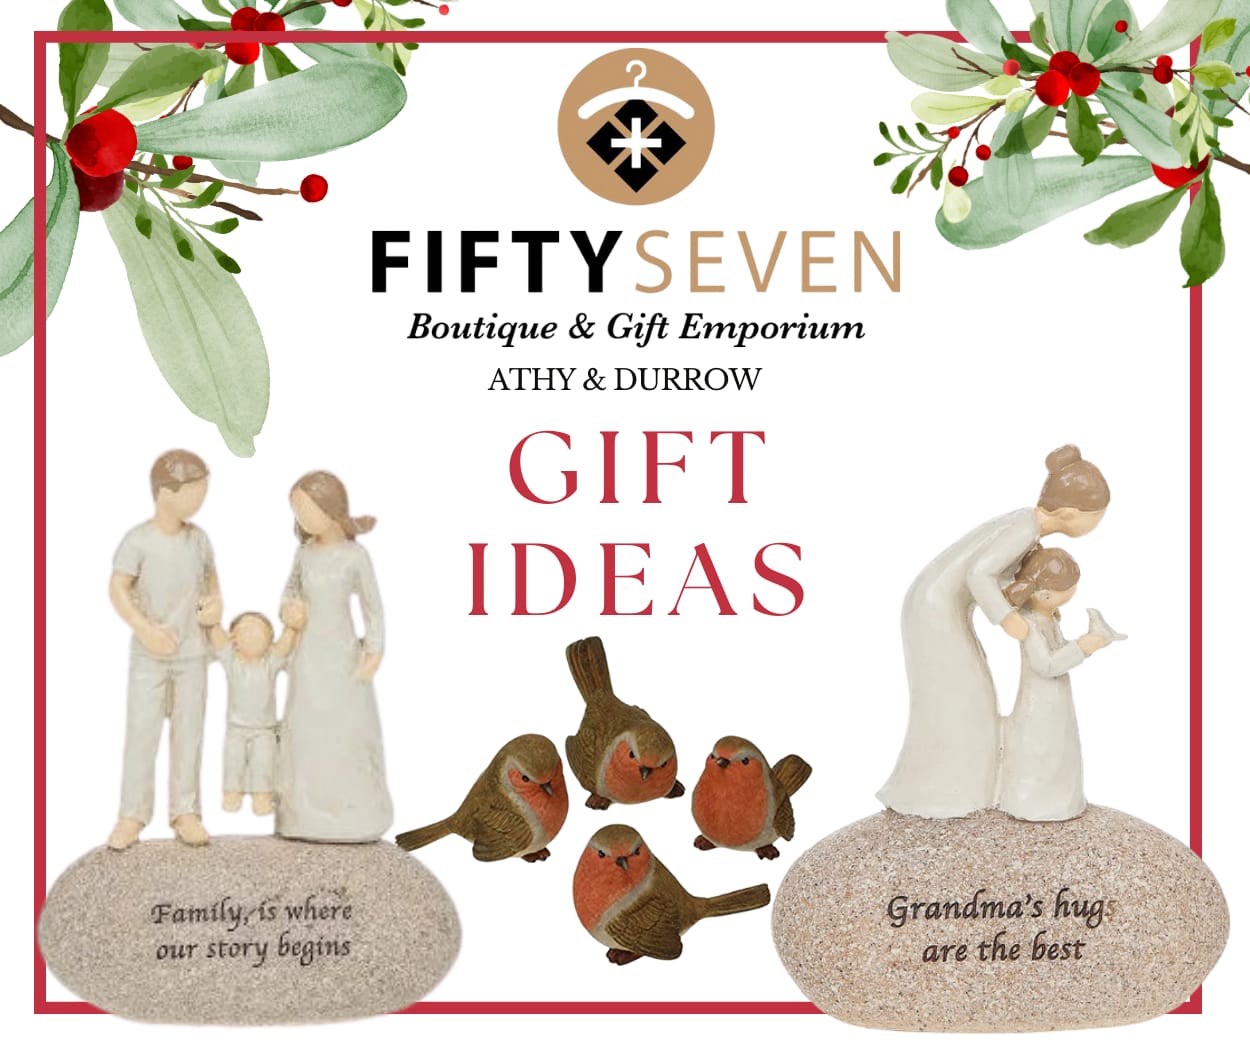 Christmas gift ideas from Fifty Seven Boutique